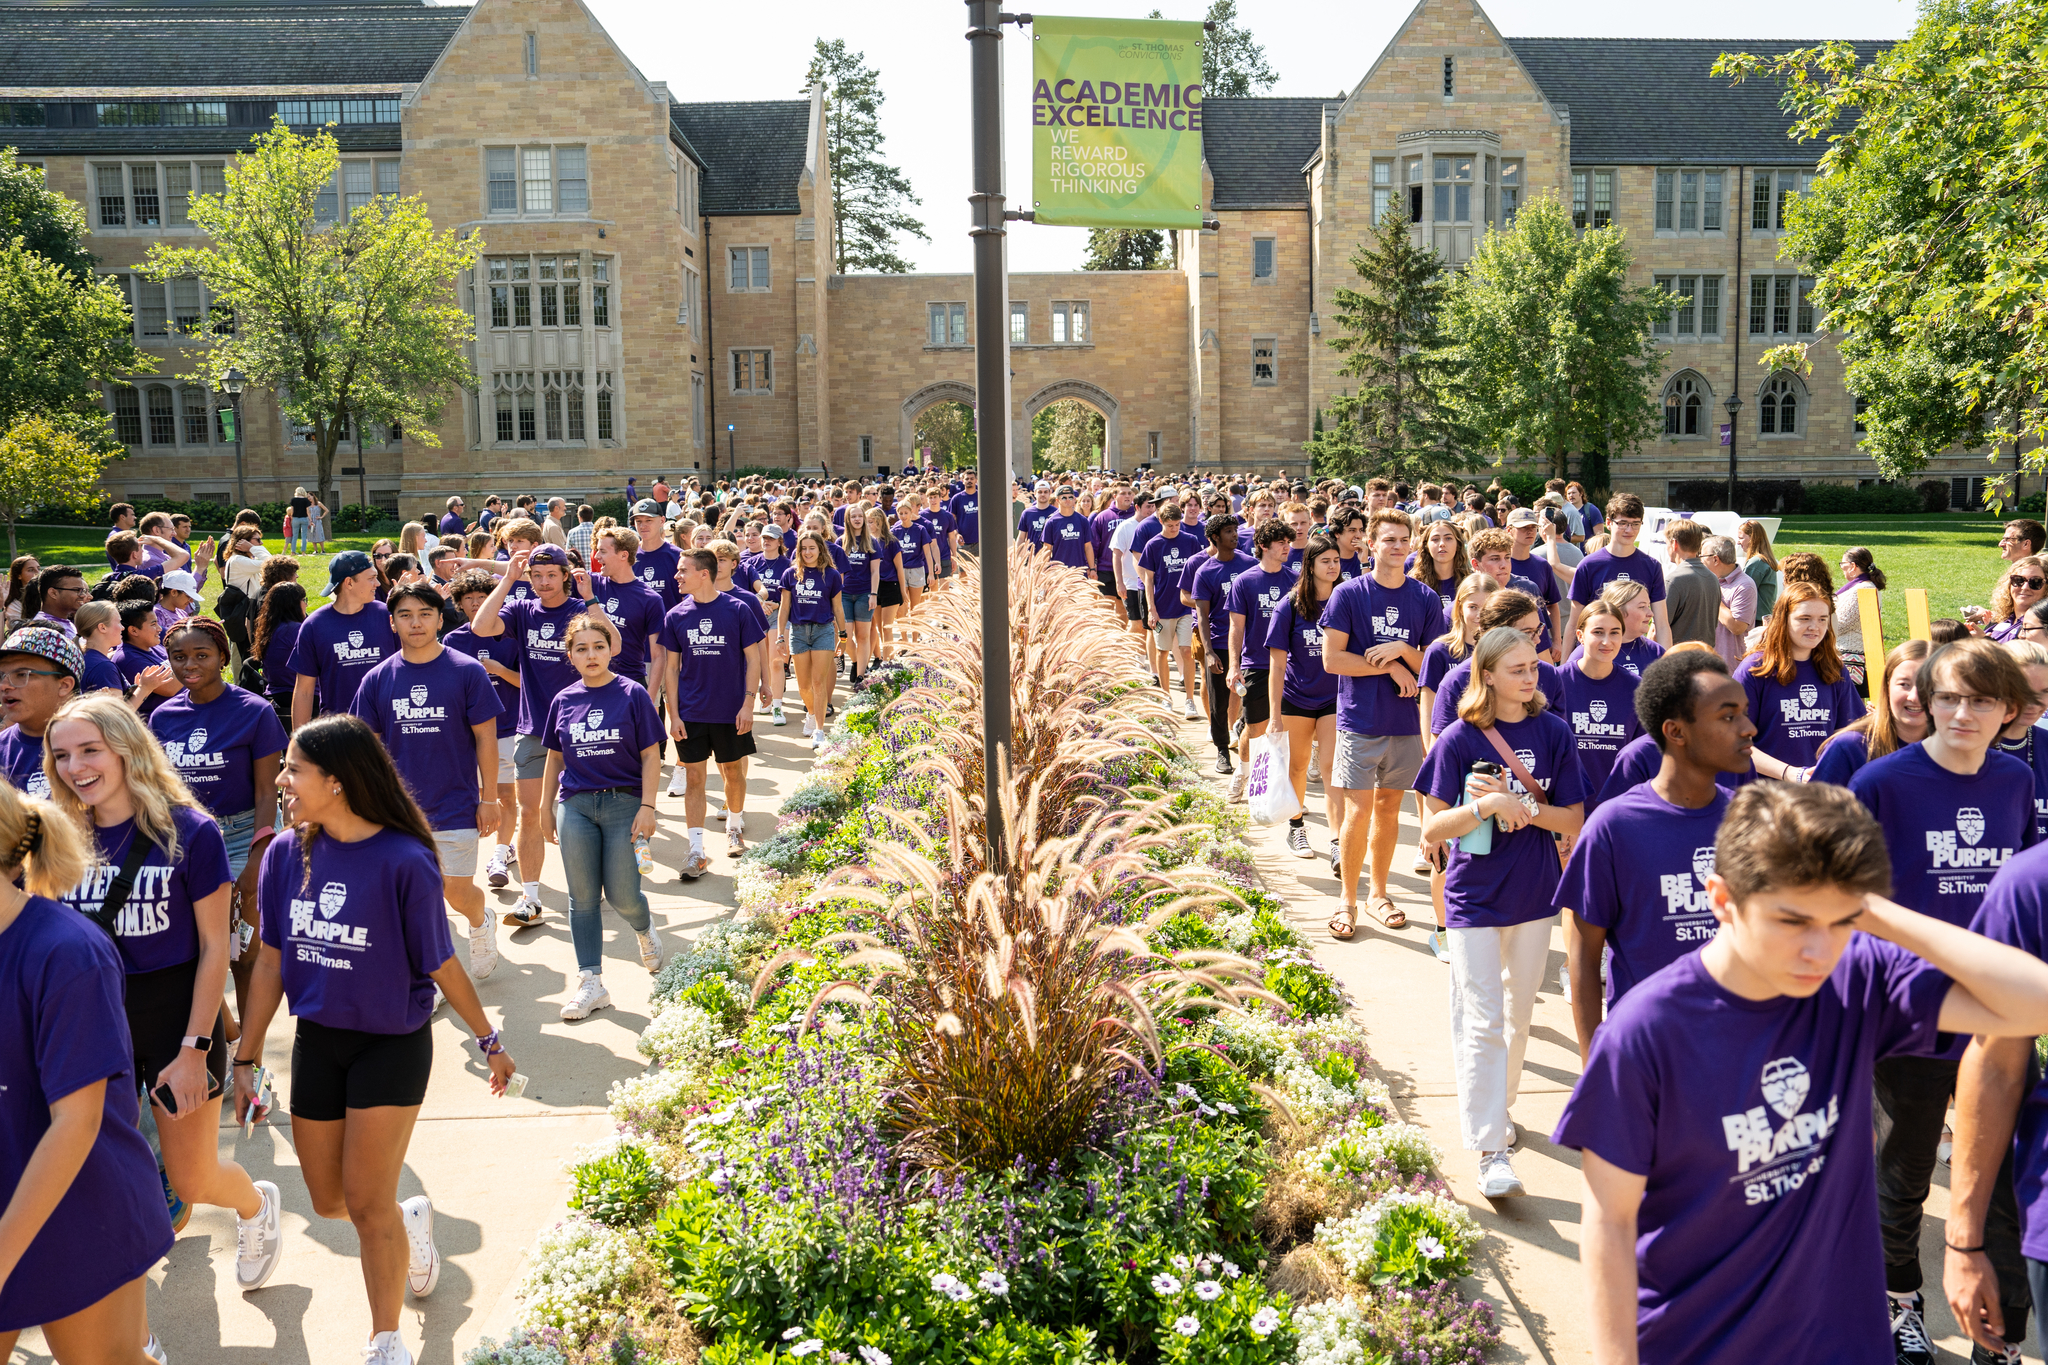 Students participate in March Through the Arches for the Class of 2026 welcoming event